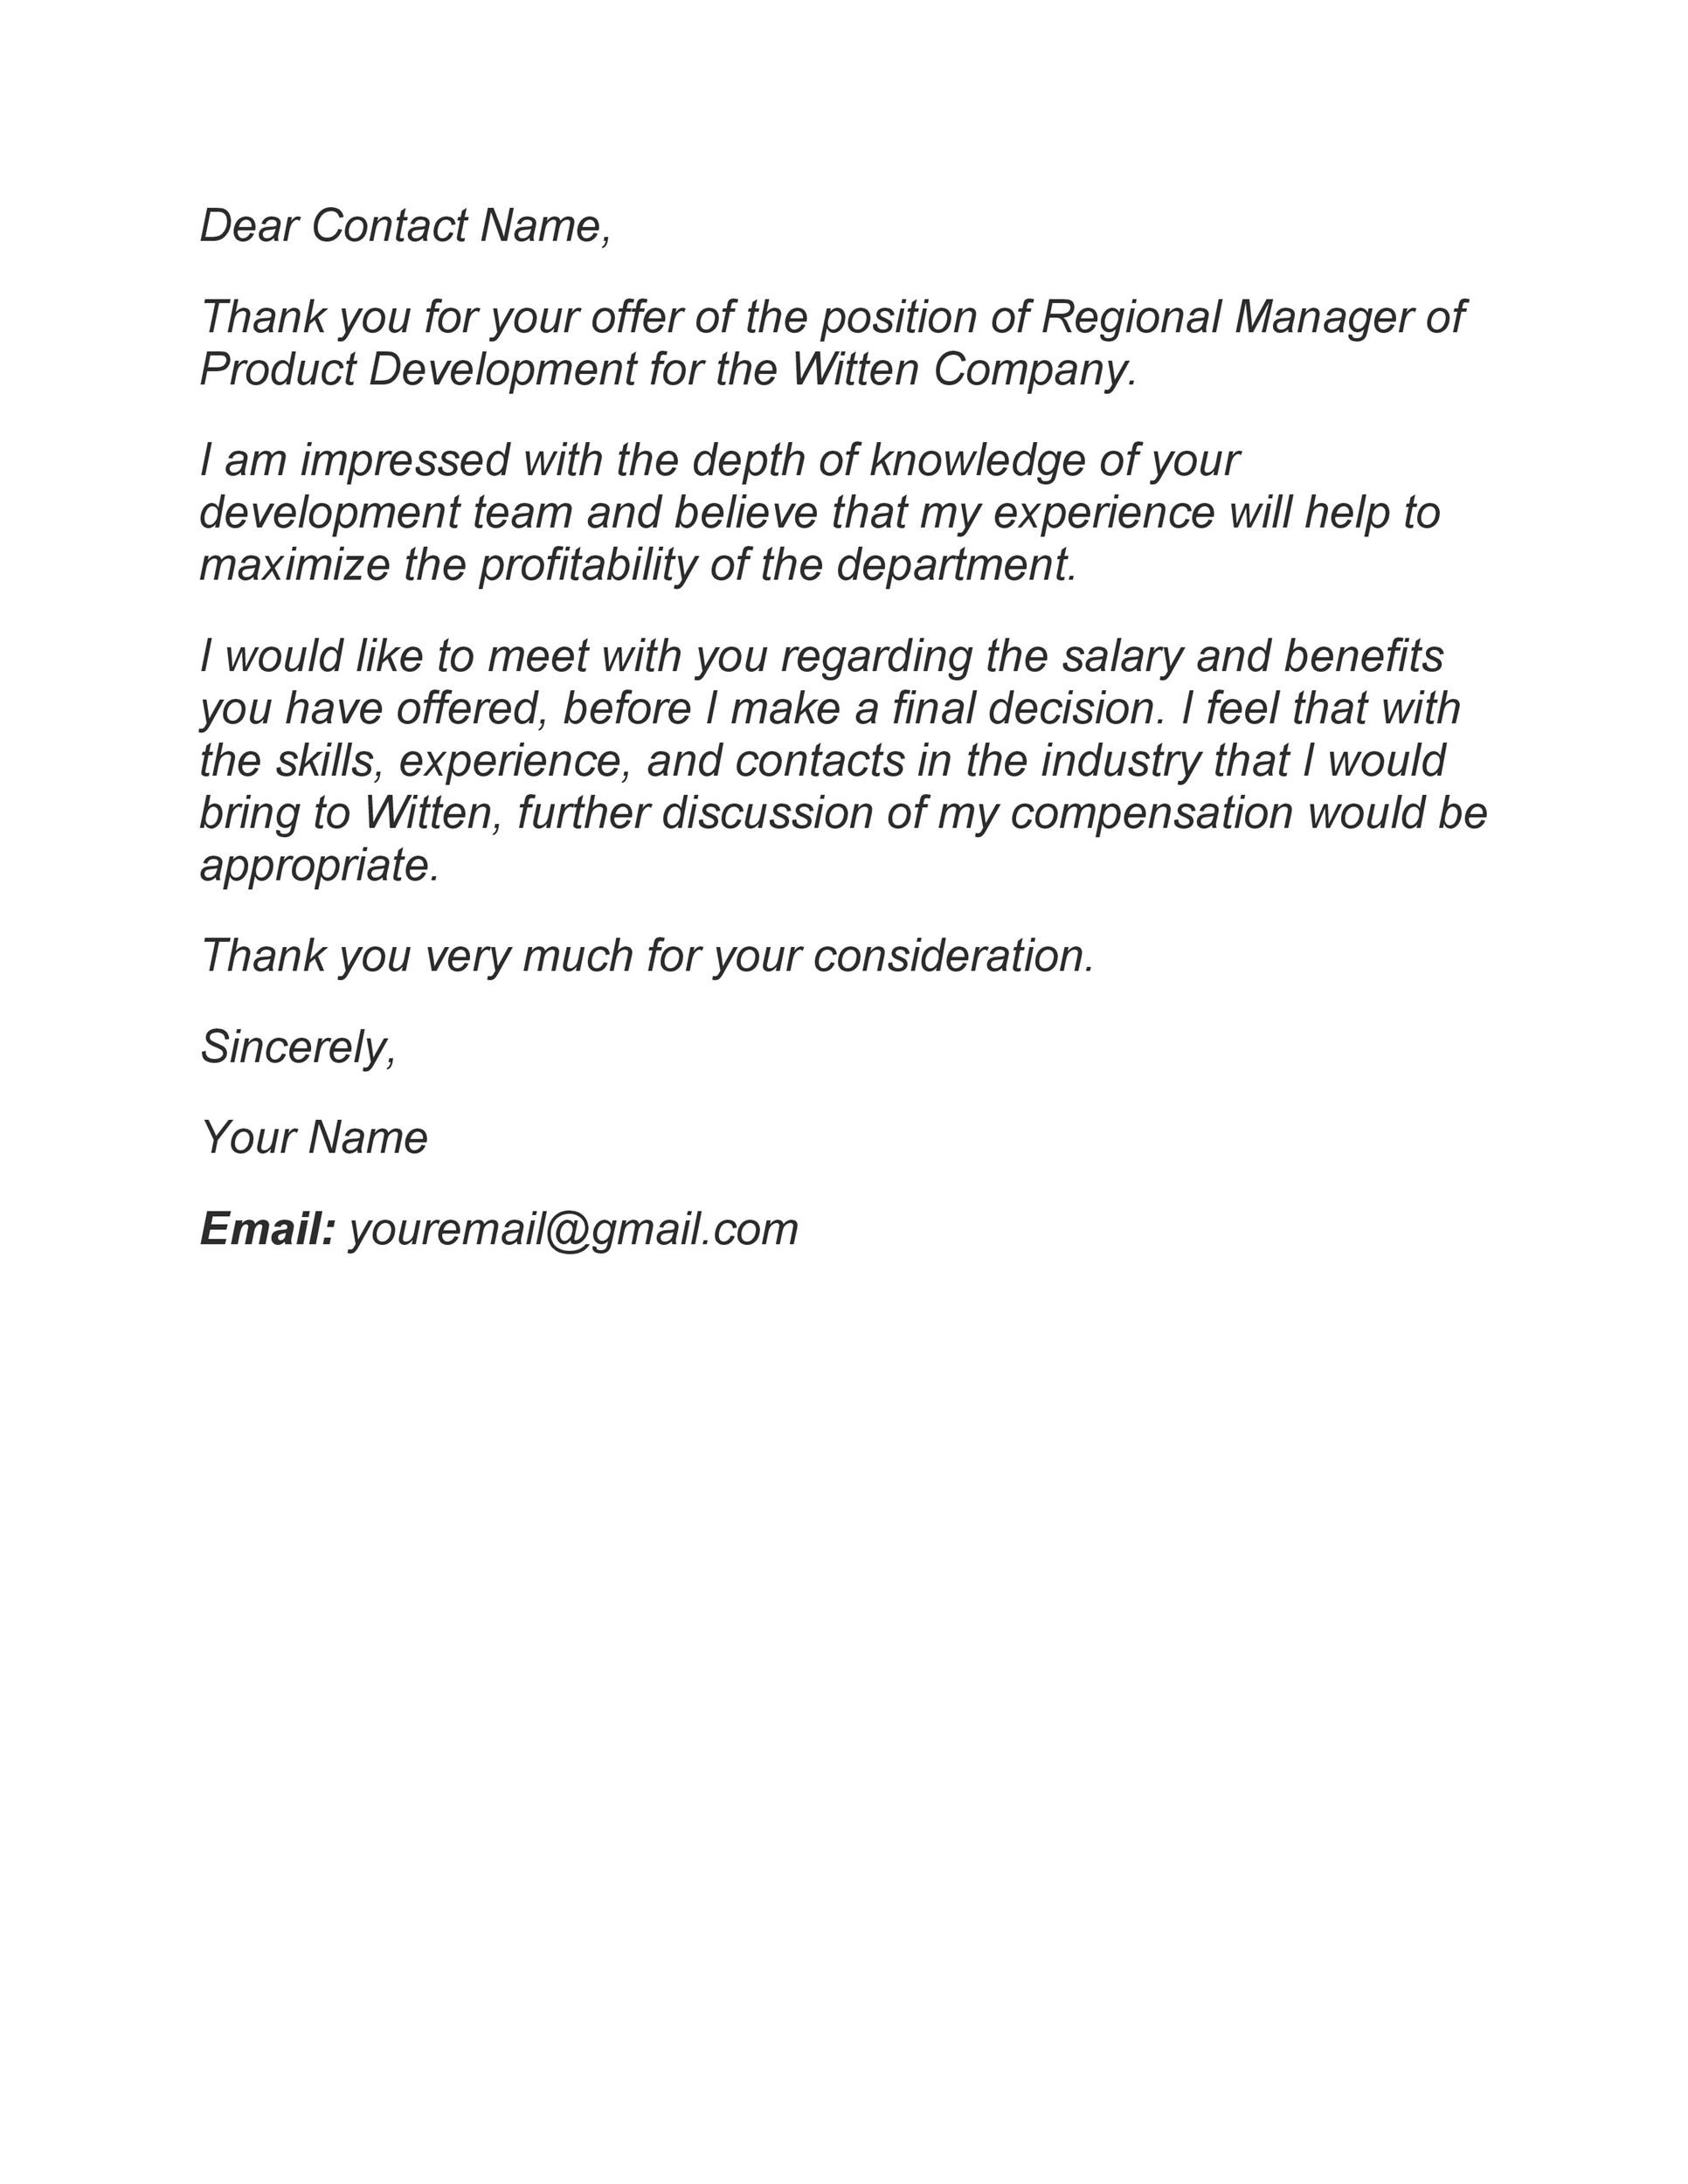 Free salary negotiation letter 45